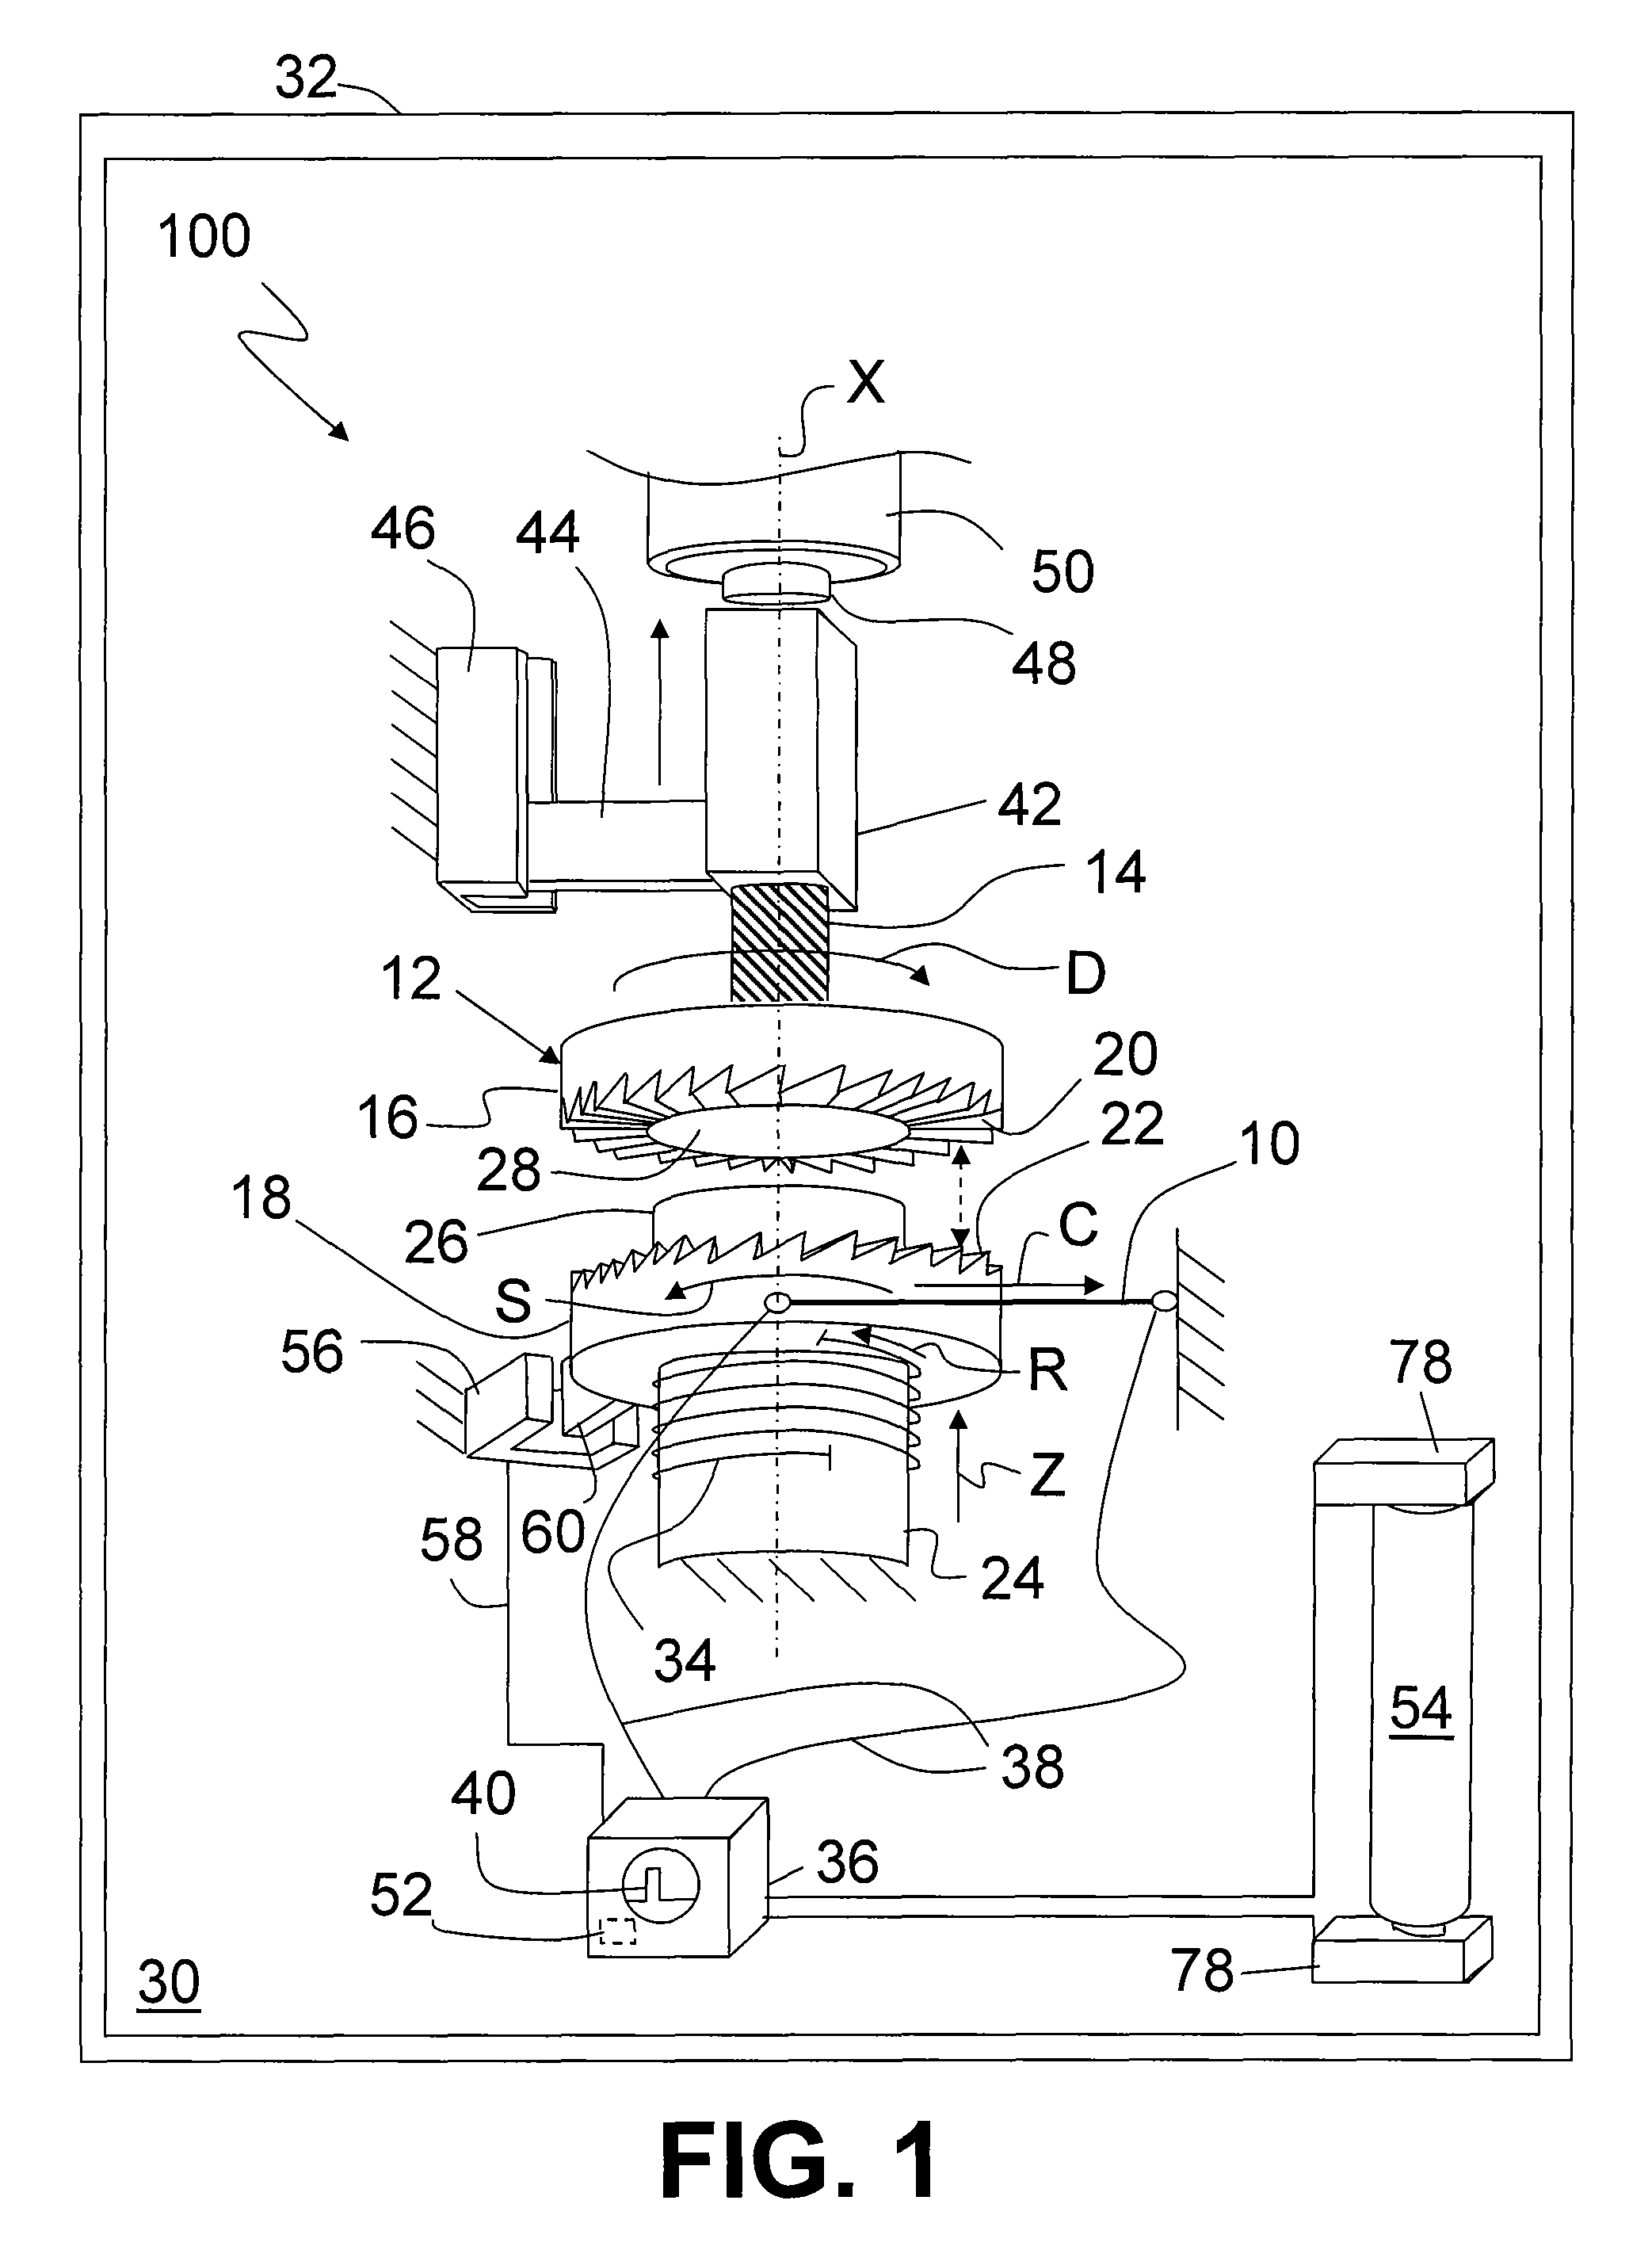 Lead screw delivery device using reusable shape memory actuator drive